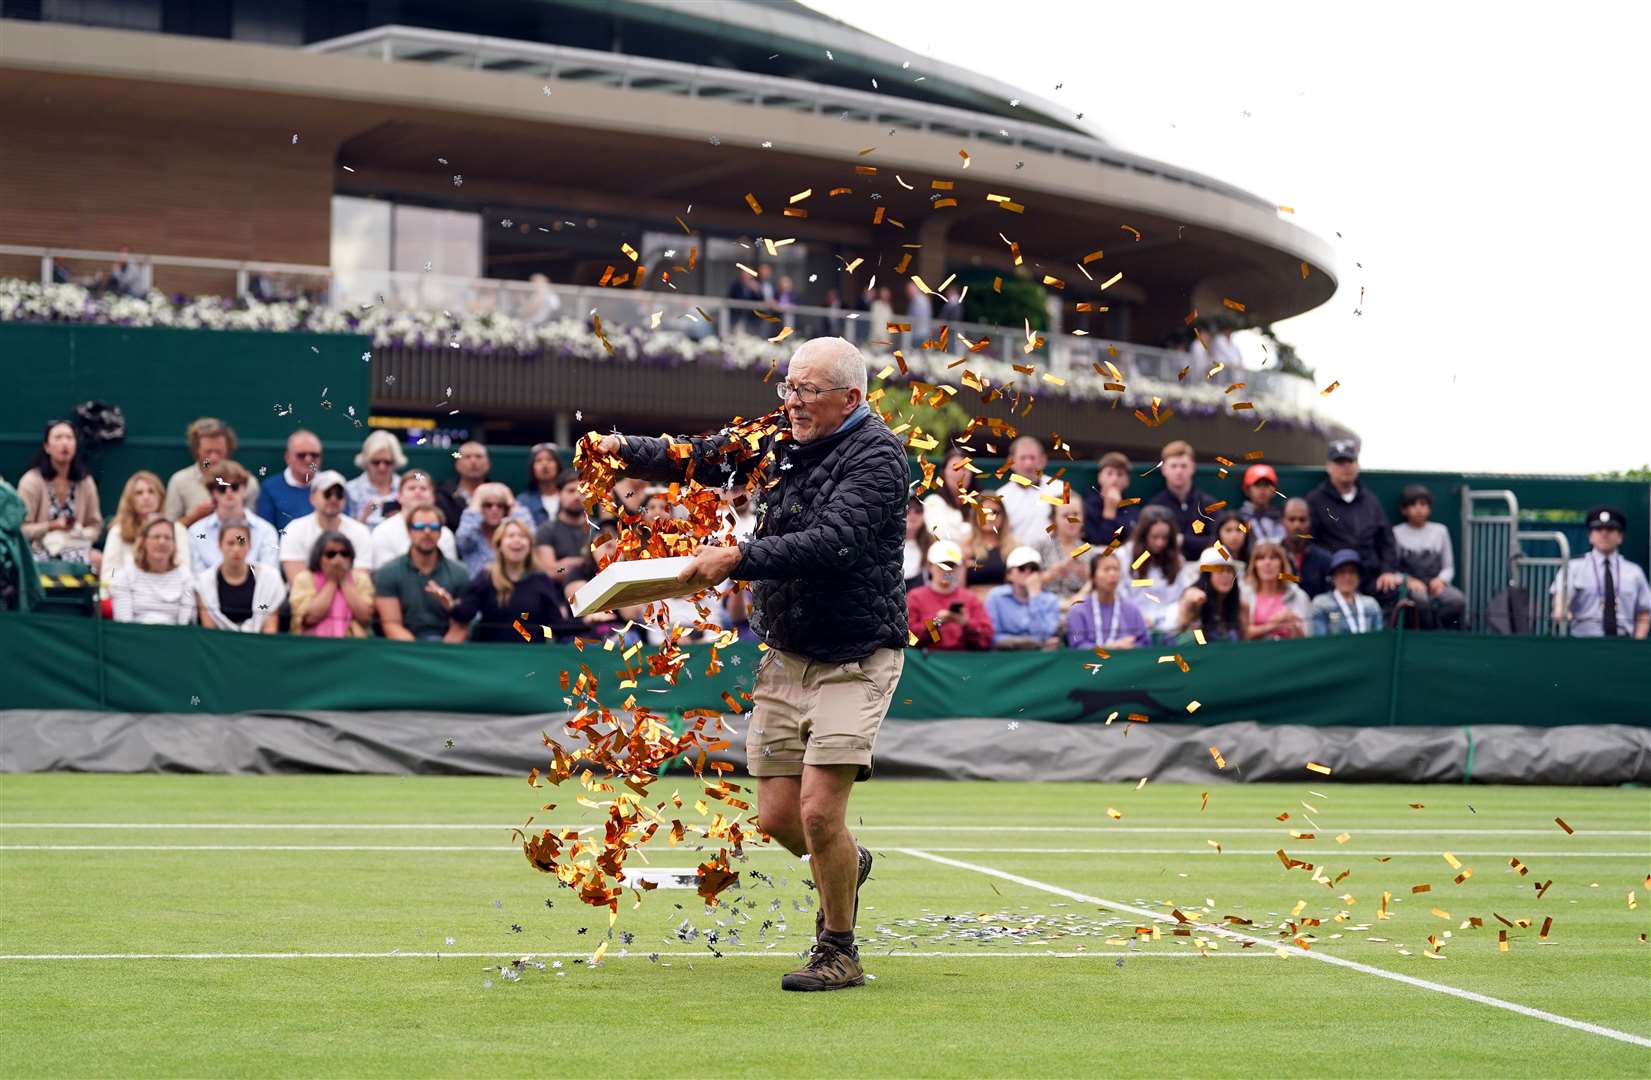 William Ward on Court 18 throwing confetti on the grass (Adam Davy/PA)